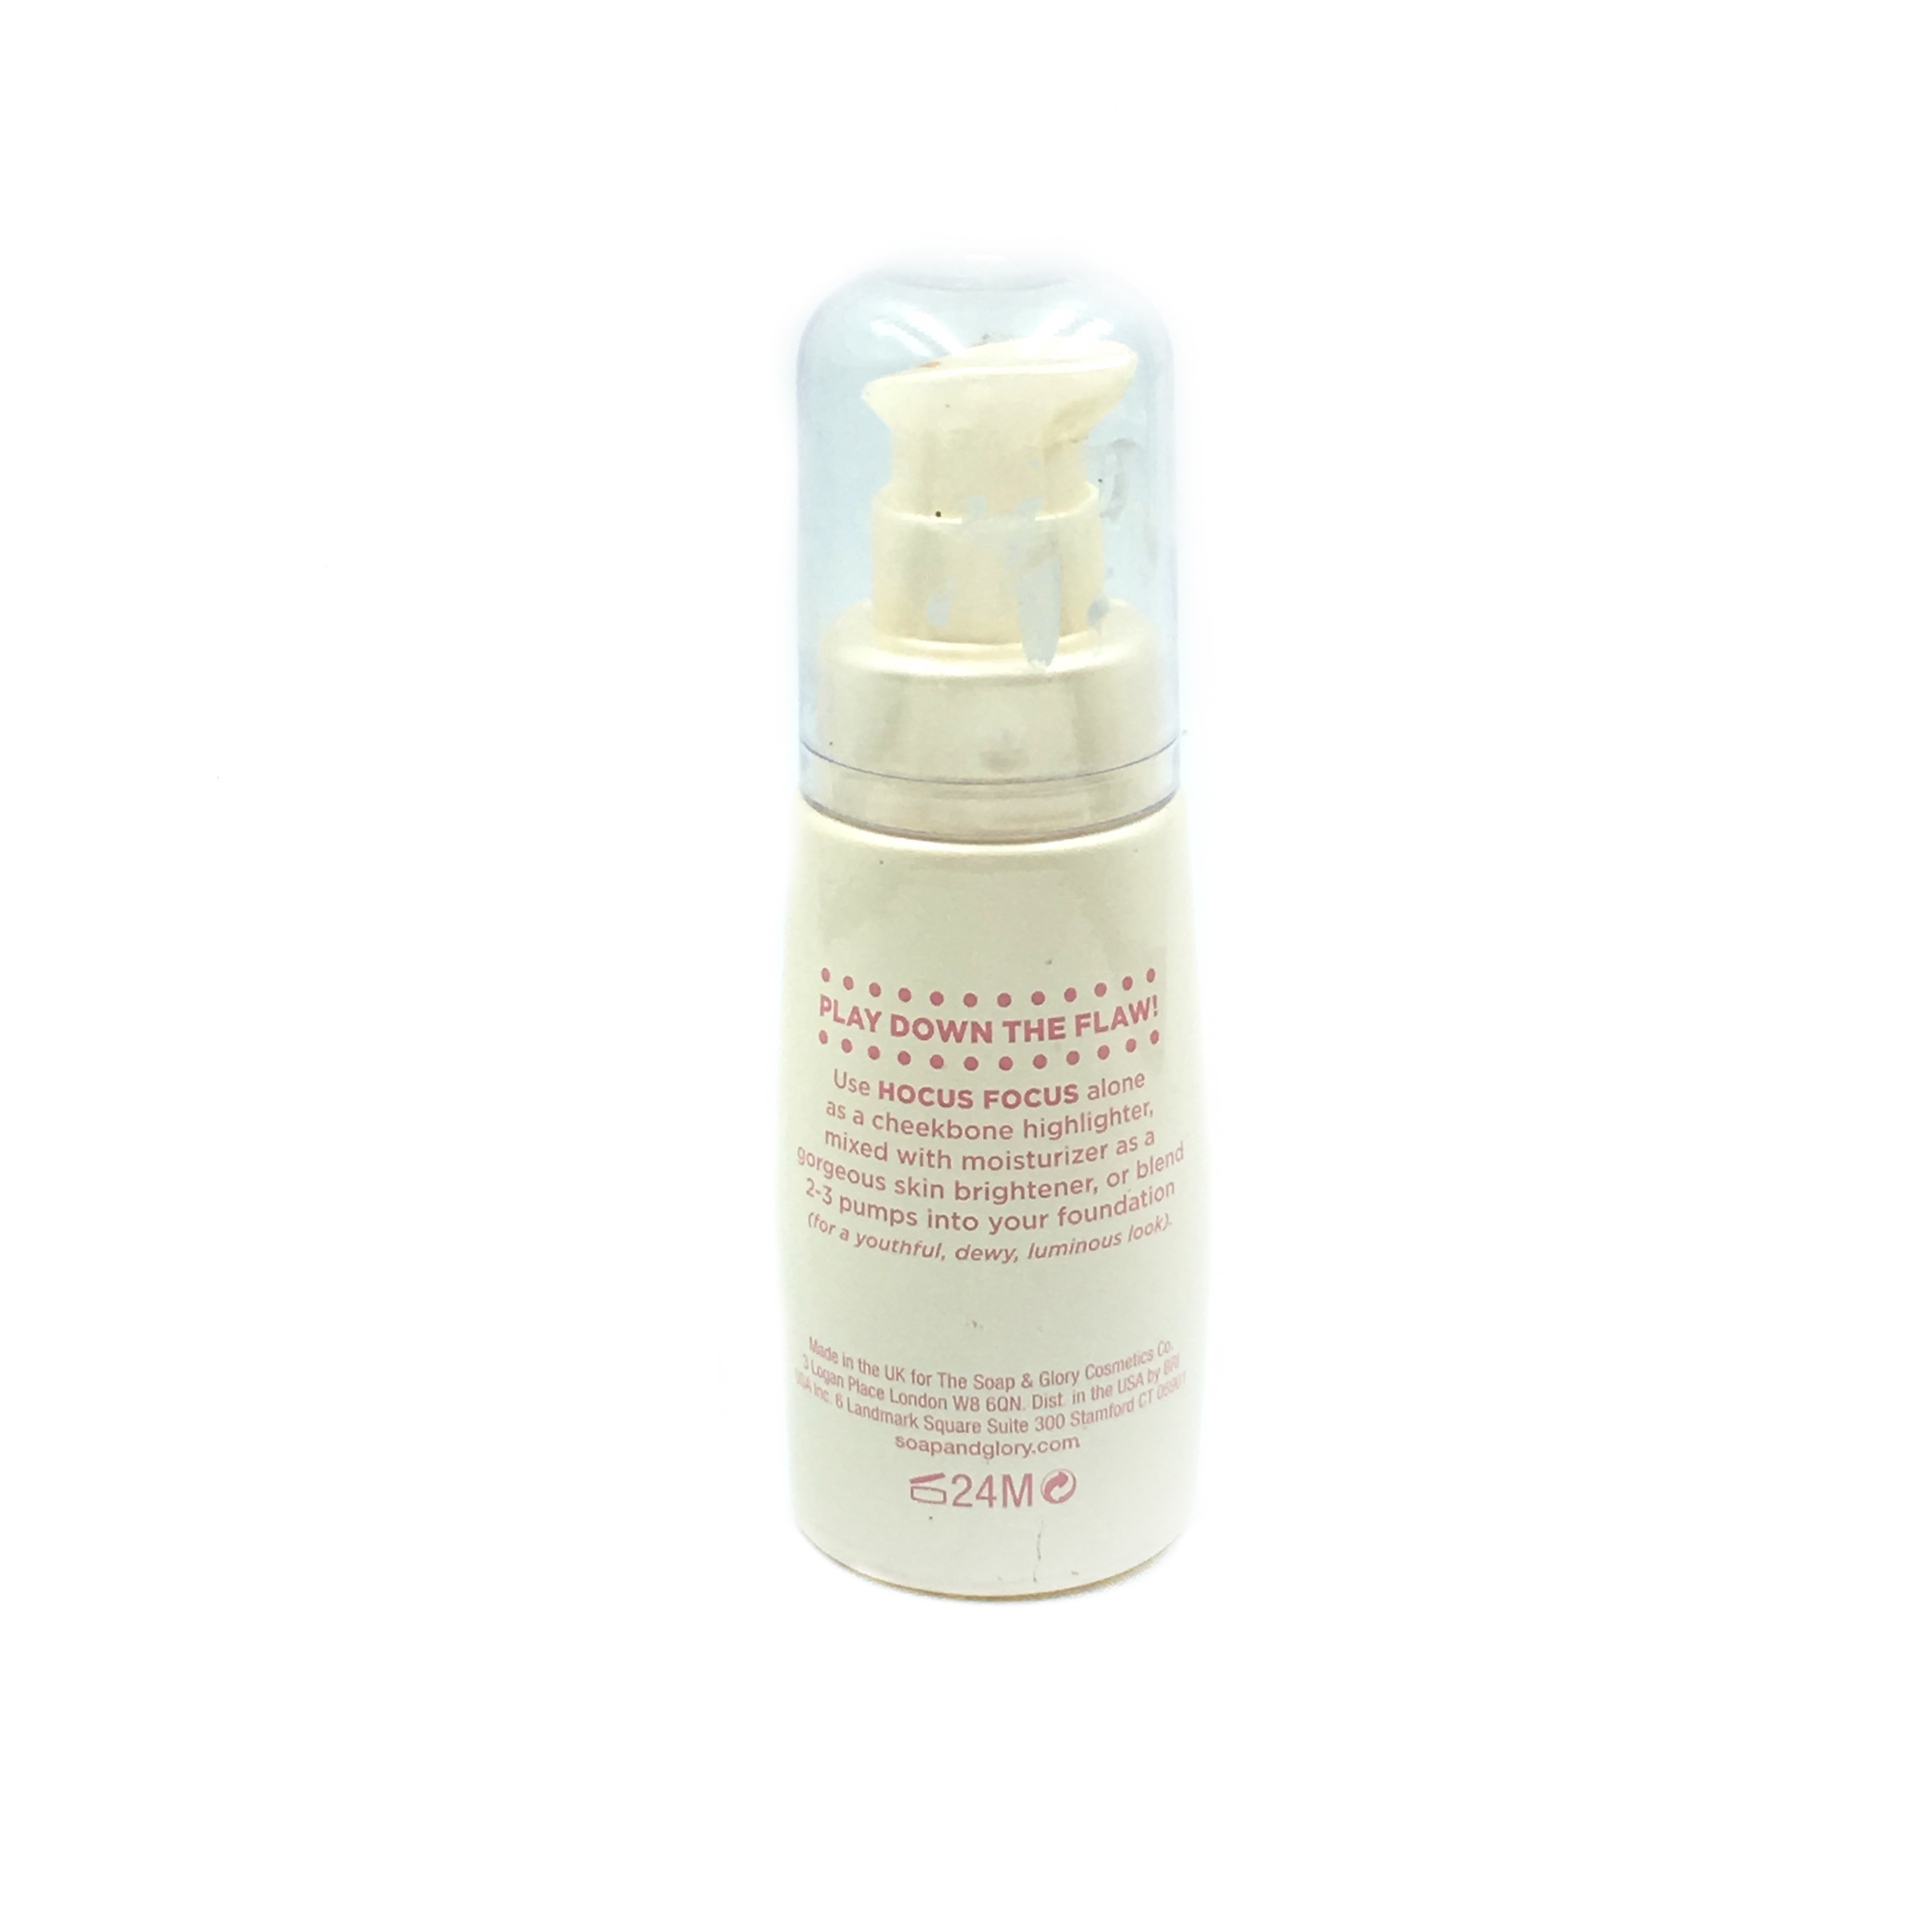 Soap&Glory Hocus Focus Flaw-Softening Lotion Faces